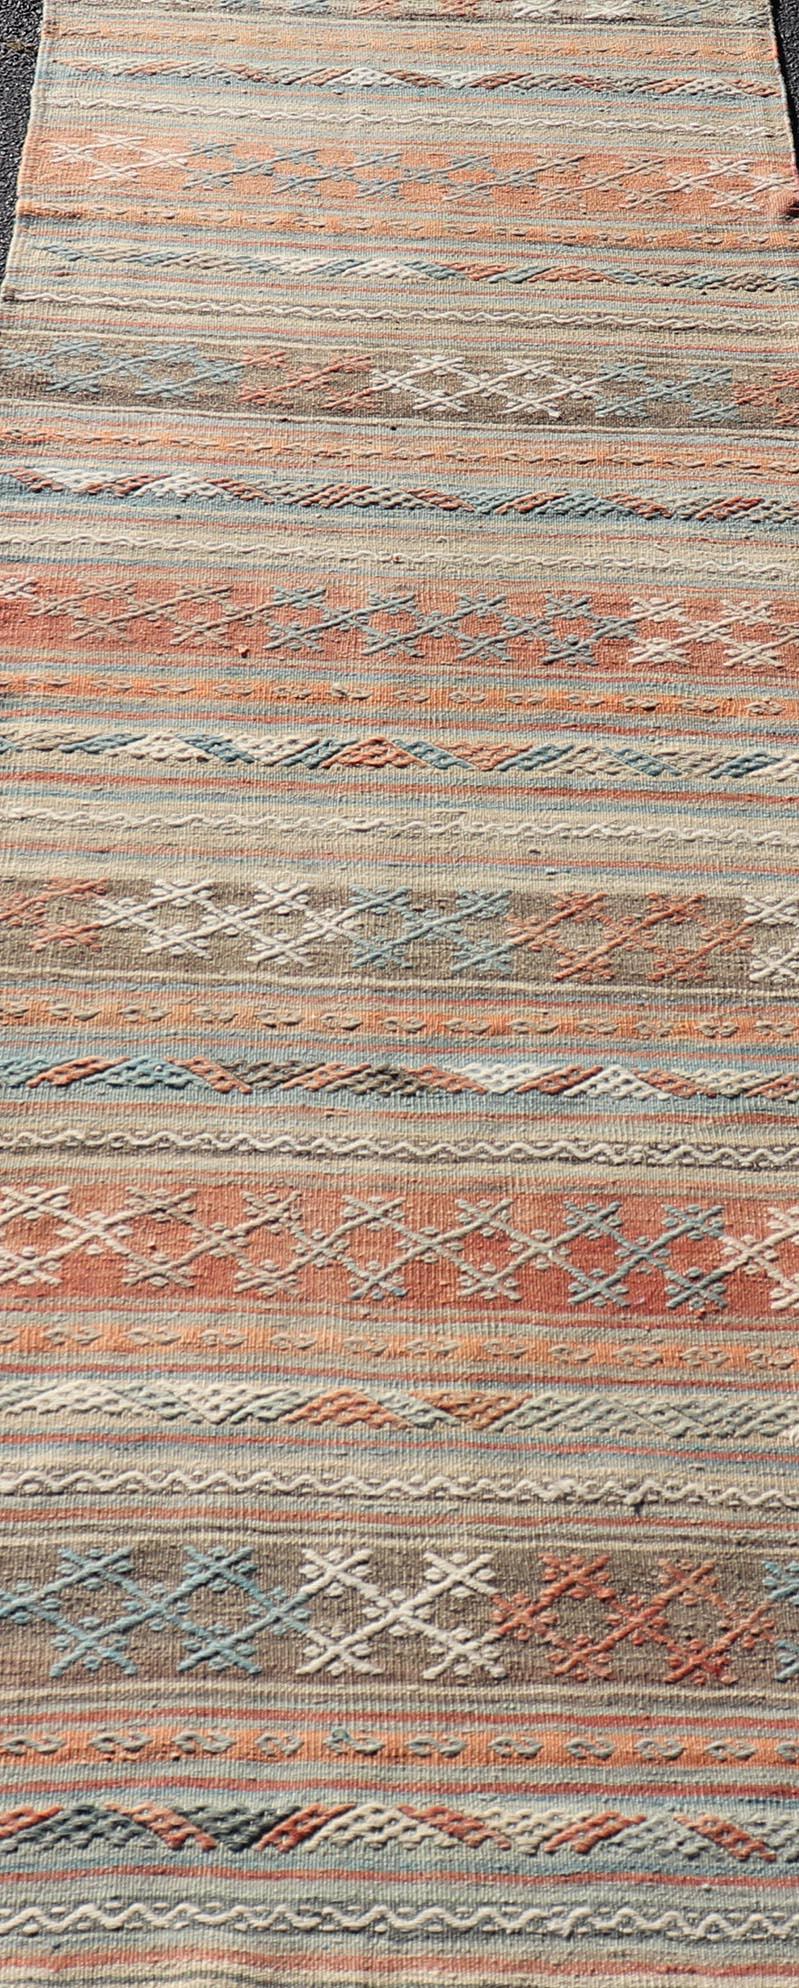 Turkish Vintage Kilim Runner with Horizontal Stripes in Bright Tones For Sale 4